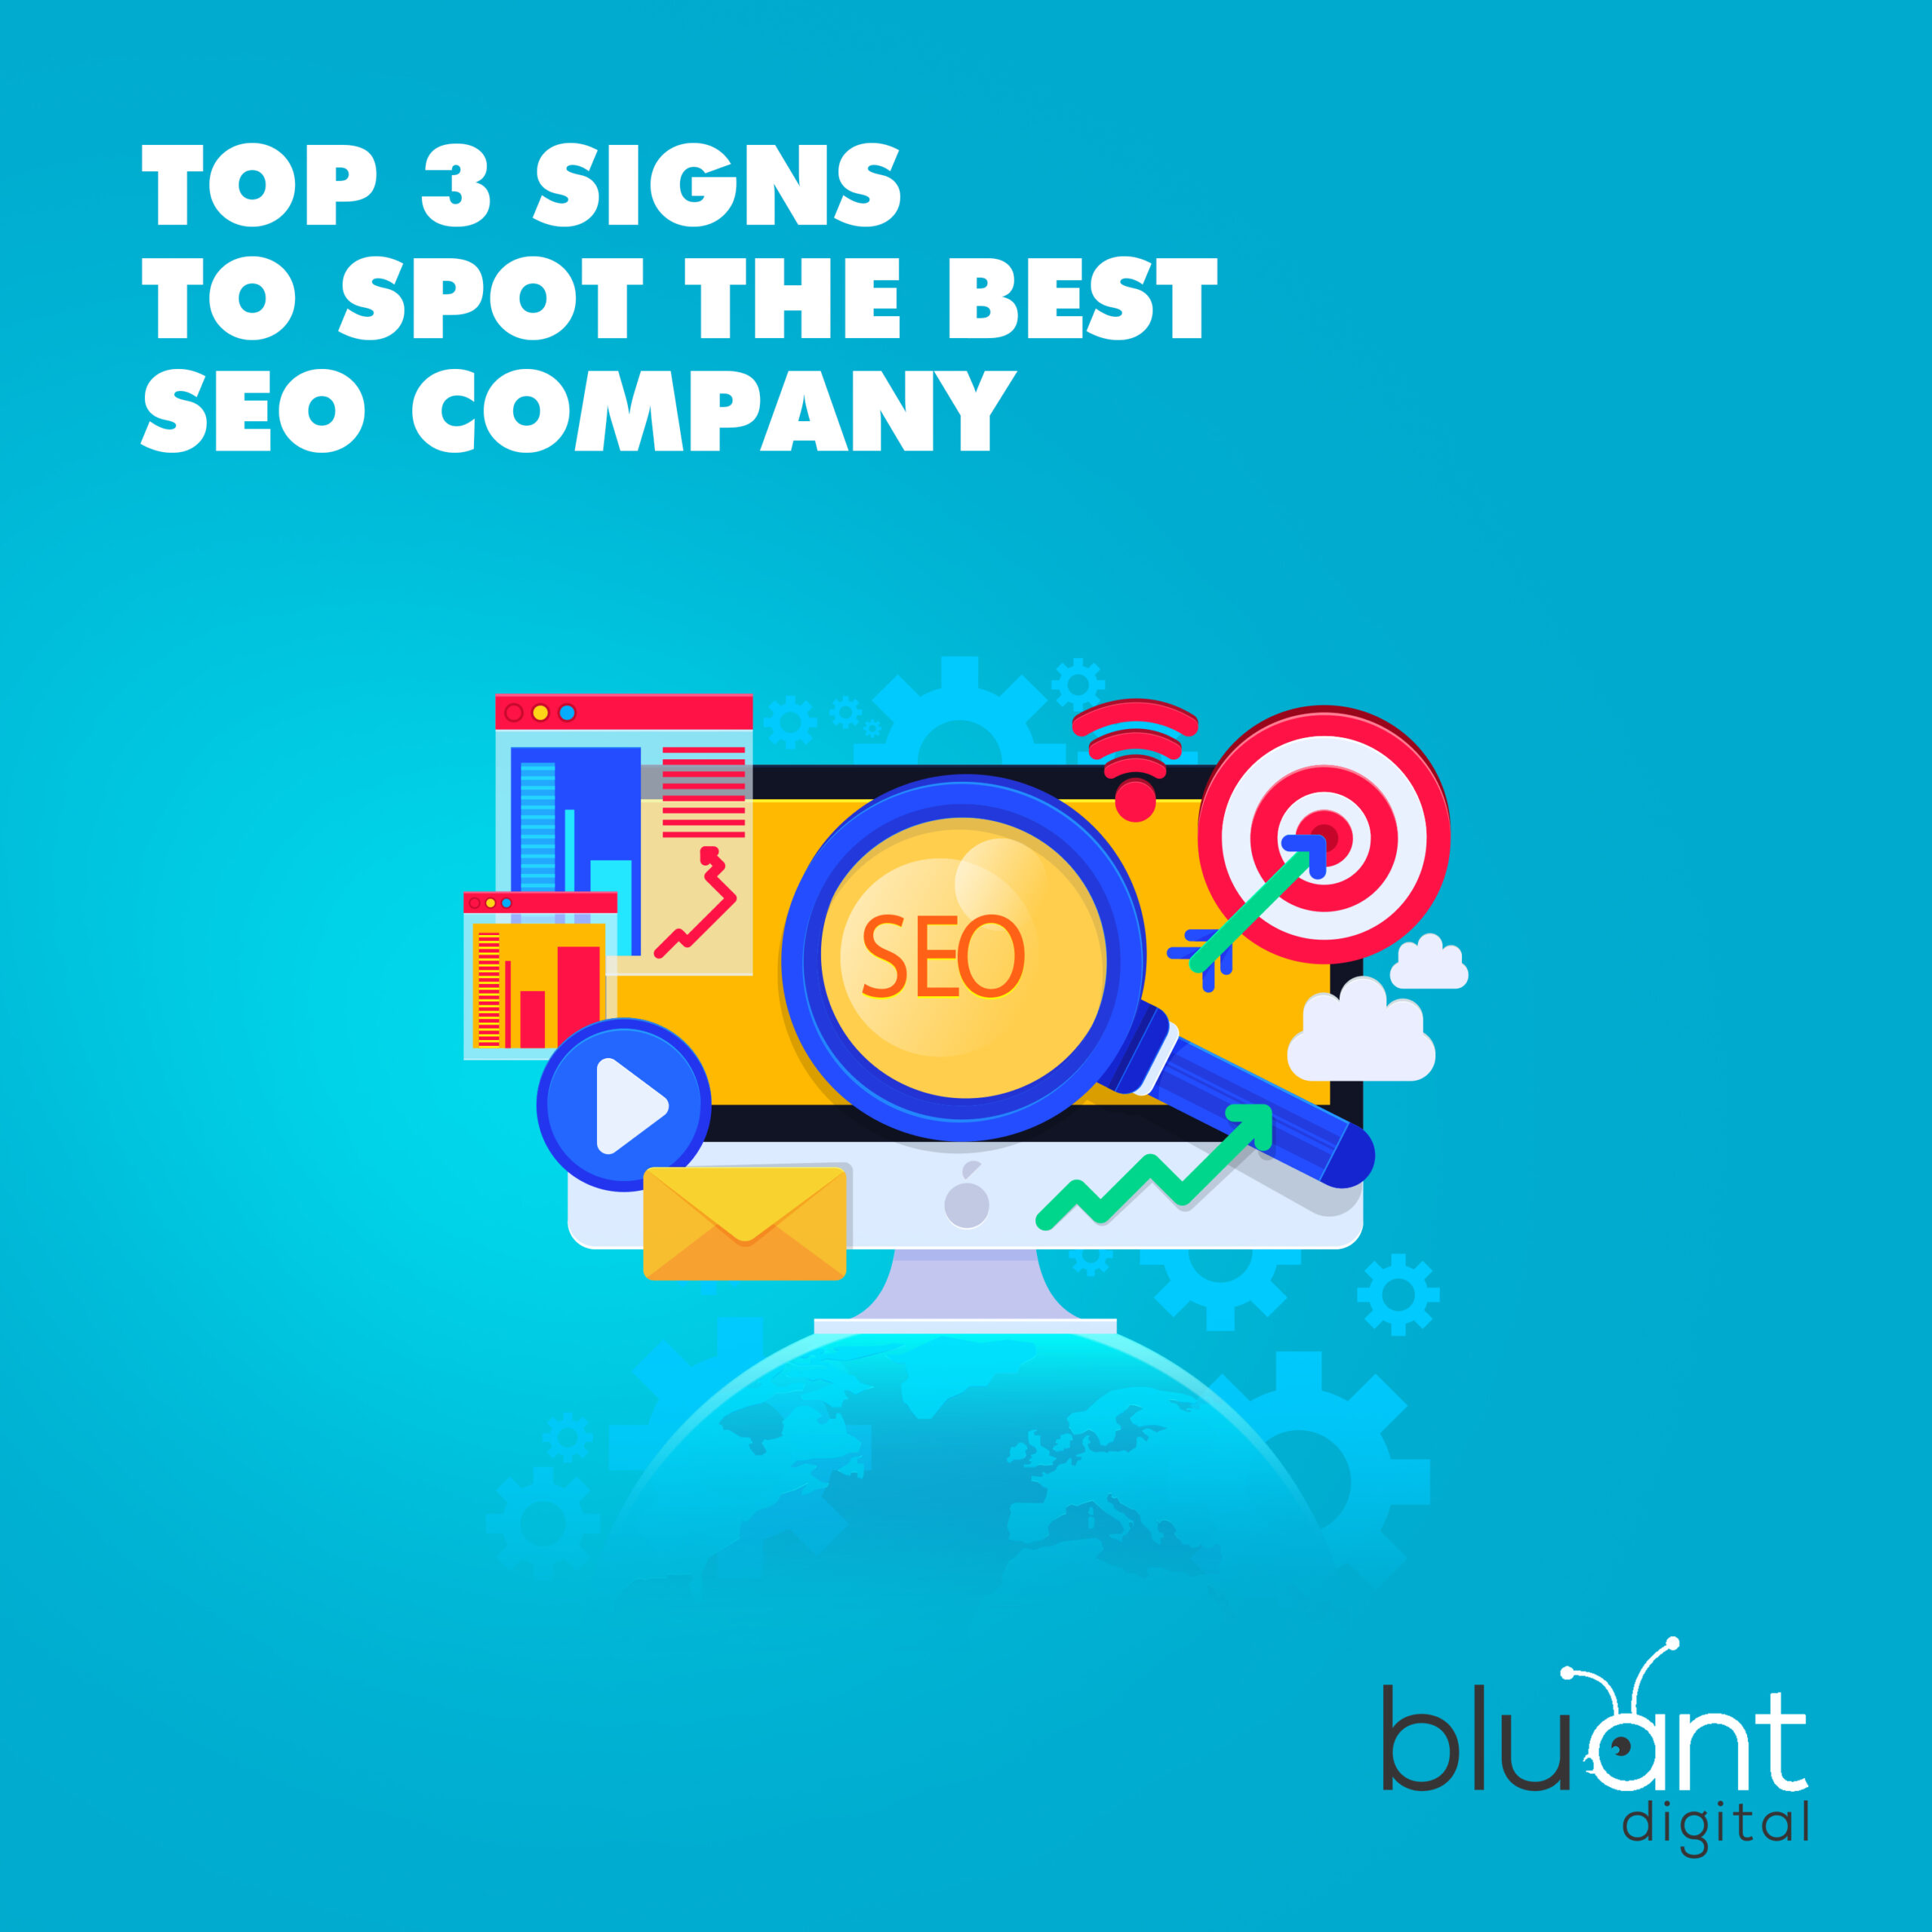 Top 3 Signs to Spot the Best SEO Company